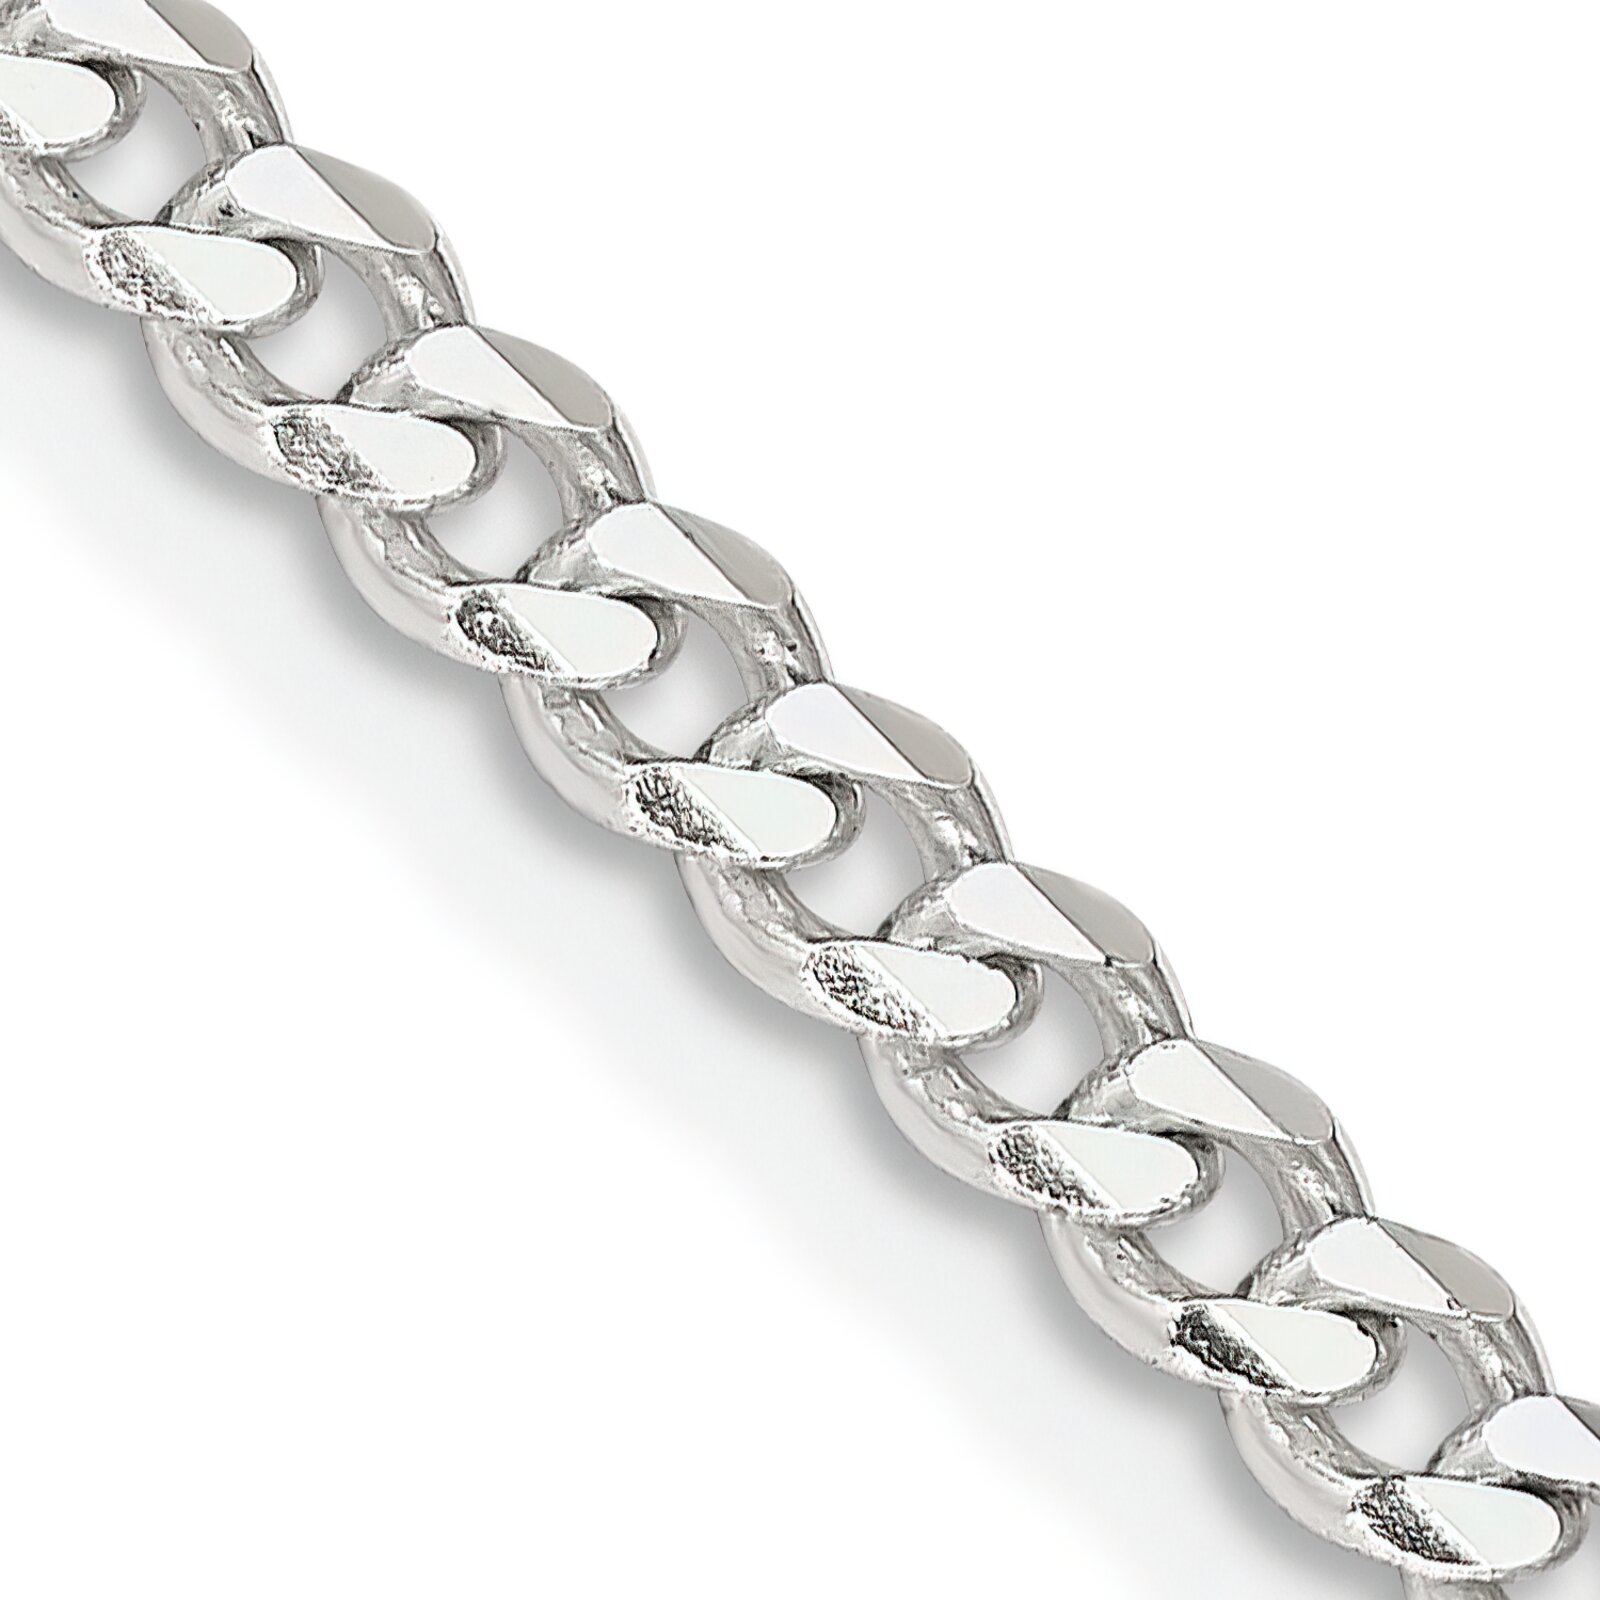 Findingking Sterling Silver Curb Chain 16"